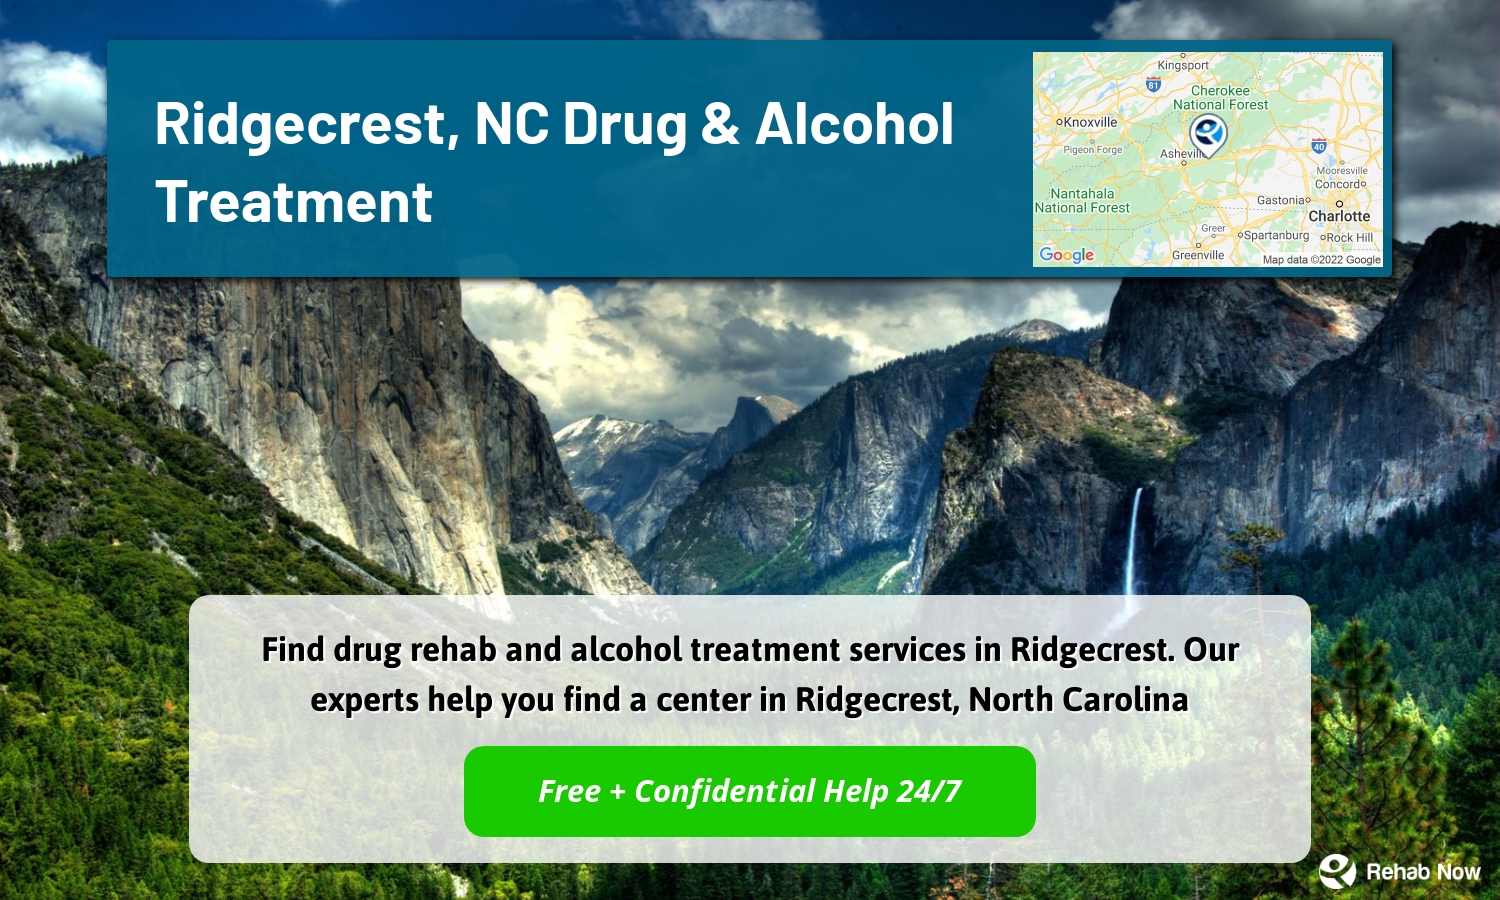 Find drug rehab and alcohol treatment services in Ridgecrest. Our experts help you find a center in Ridgecrest, North Carolina